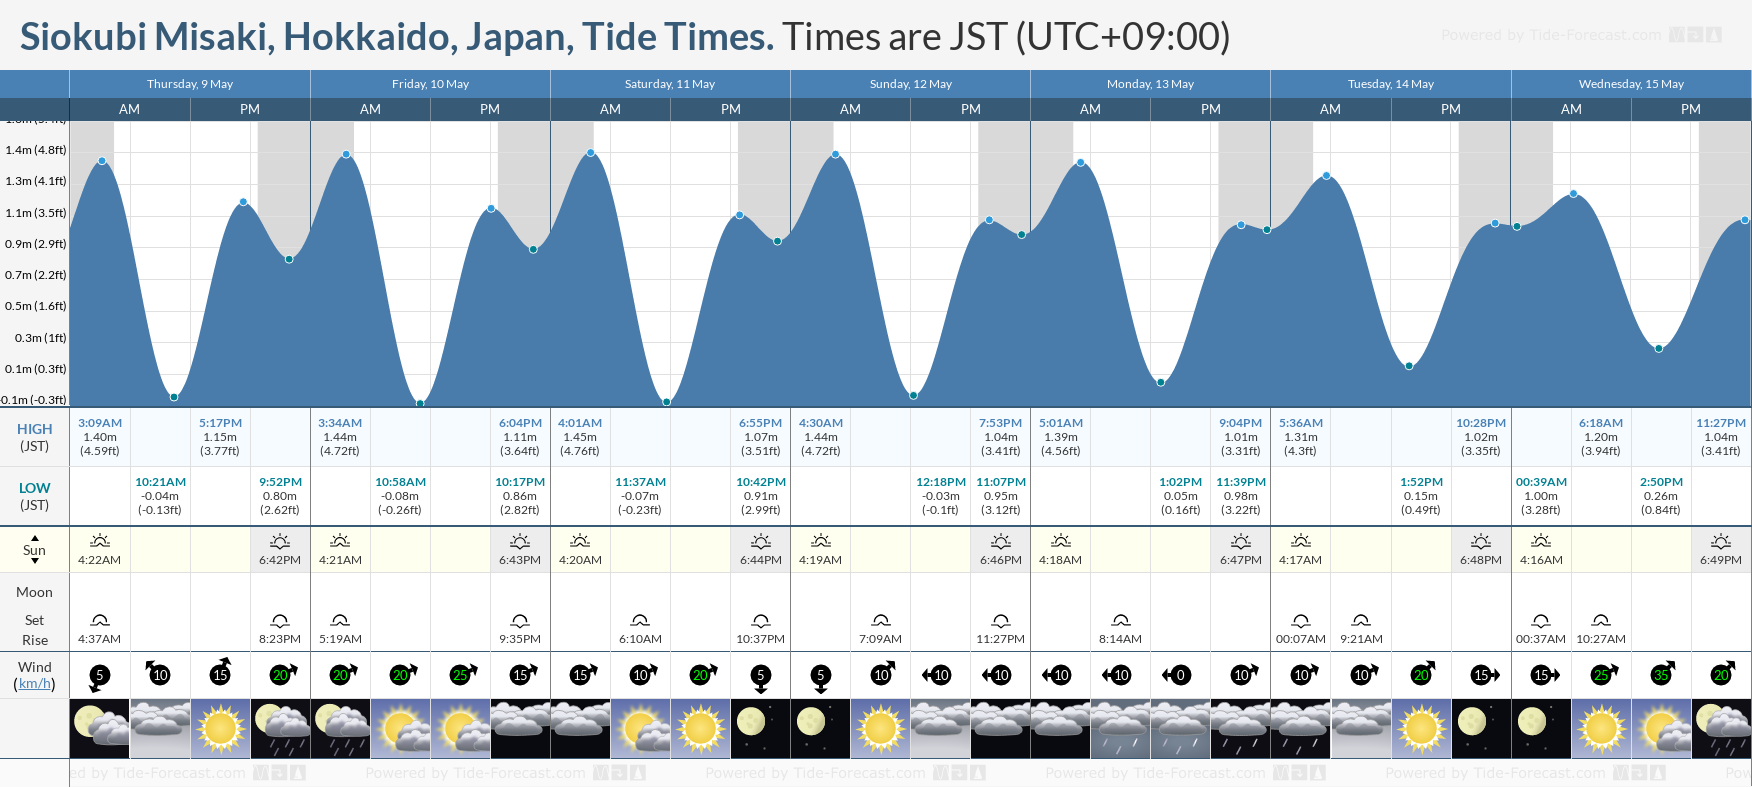 Siokubi Misaki, Hokkaido, Japan Tide Chart including high and low tide tide times for the next 7 days